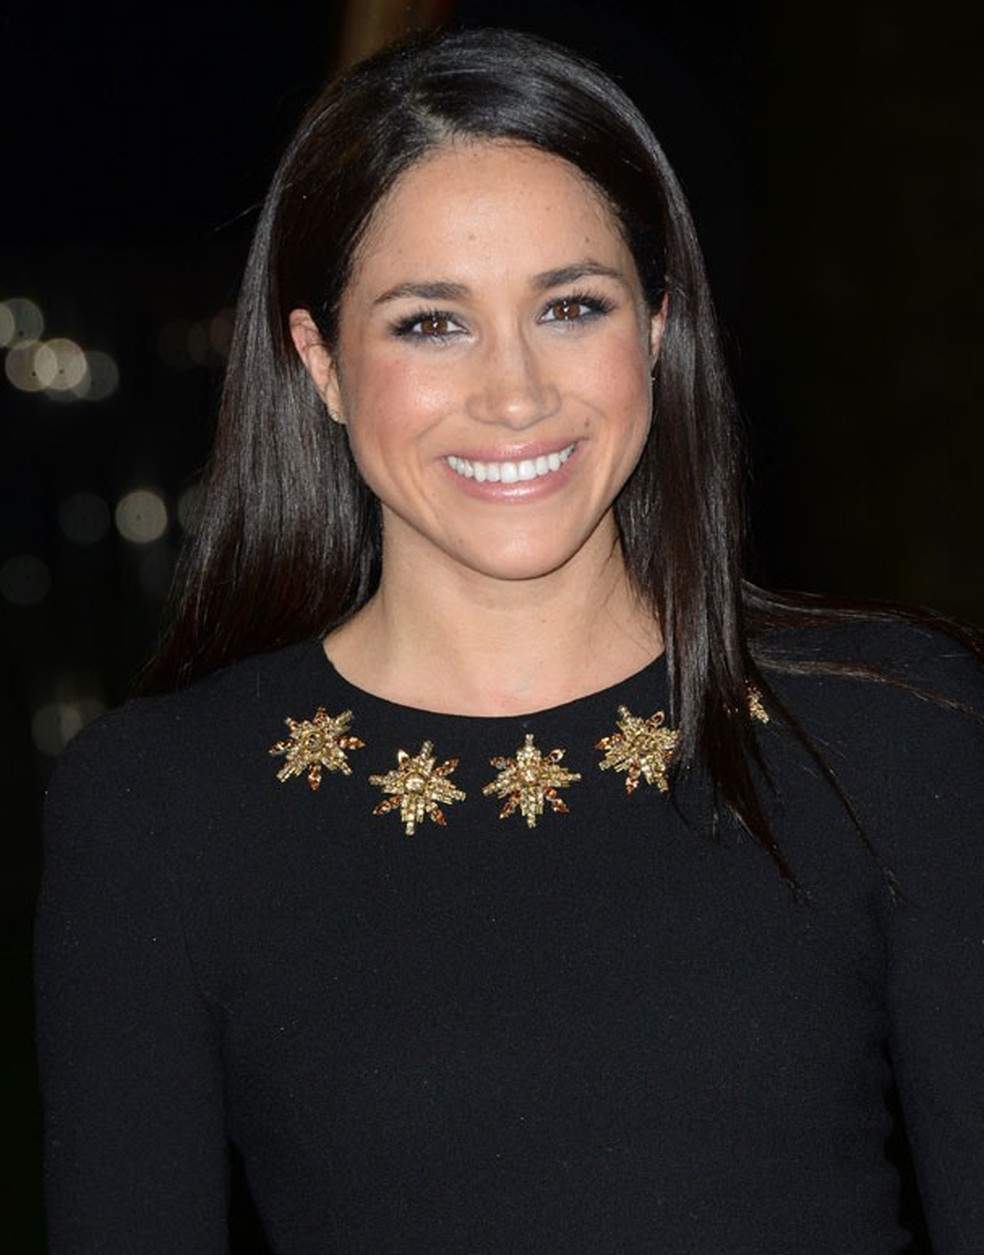 LONDON, UNITED KINGDOM - NOVEMBER 11: Meghan Markle attends the UK Premiere of "The Hunger Games: Catching Fire" at Odeon Leicester Square on November 11, 2013 in London, England. (Photo by Zak Hussein/Getty Images) (Foto: Getty Images) — Foto: Glamour